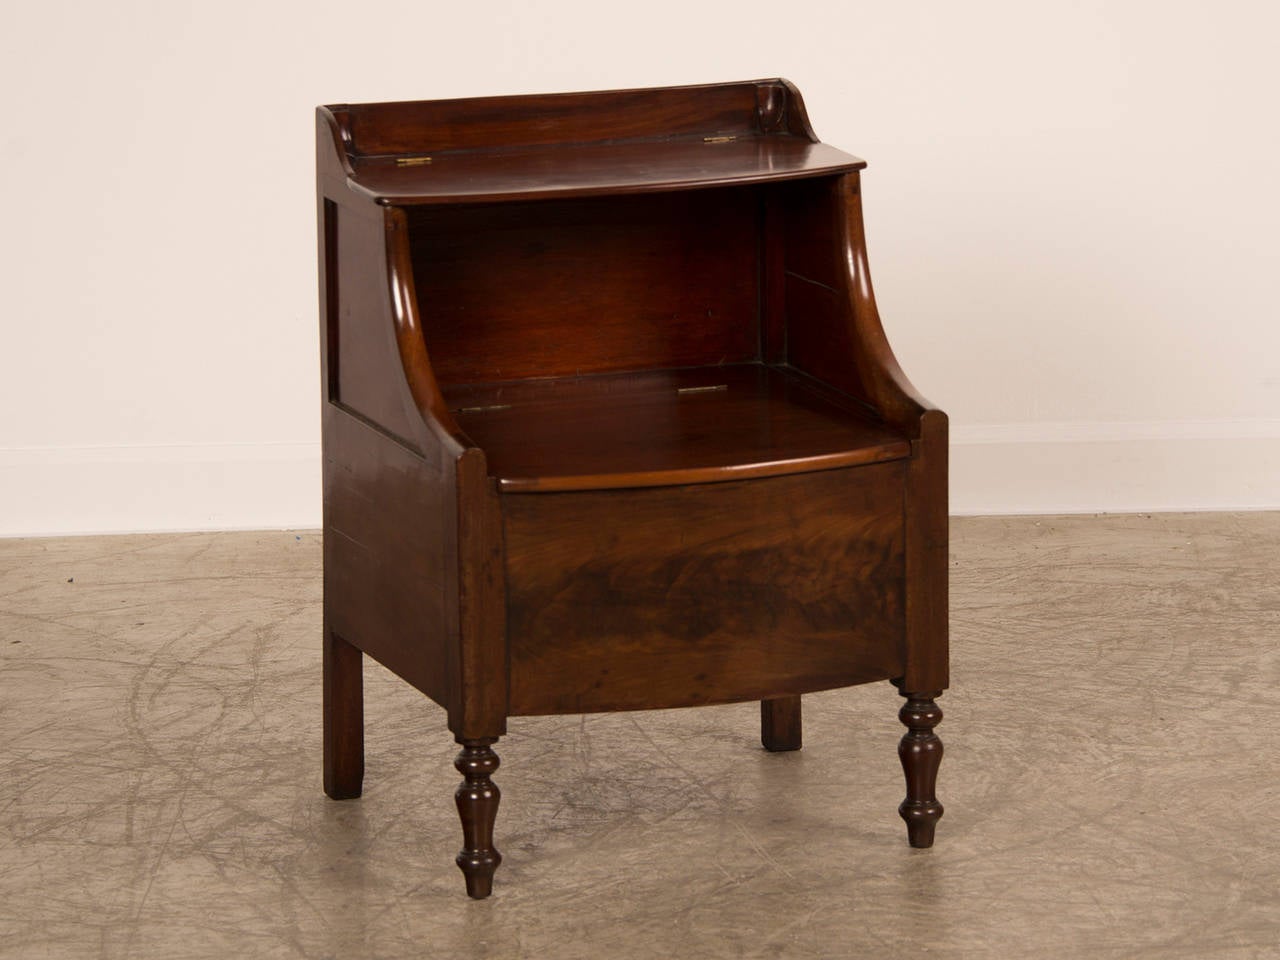 A William IV period mahogany side cupboard with two lift lids having a bow front and turned front legs from England c. 1840.